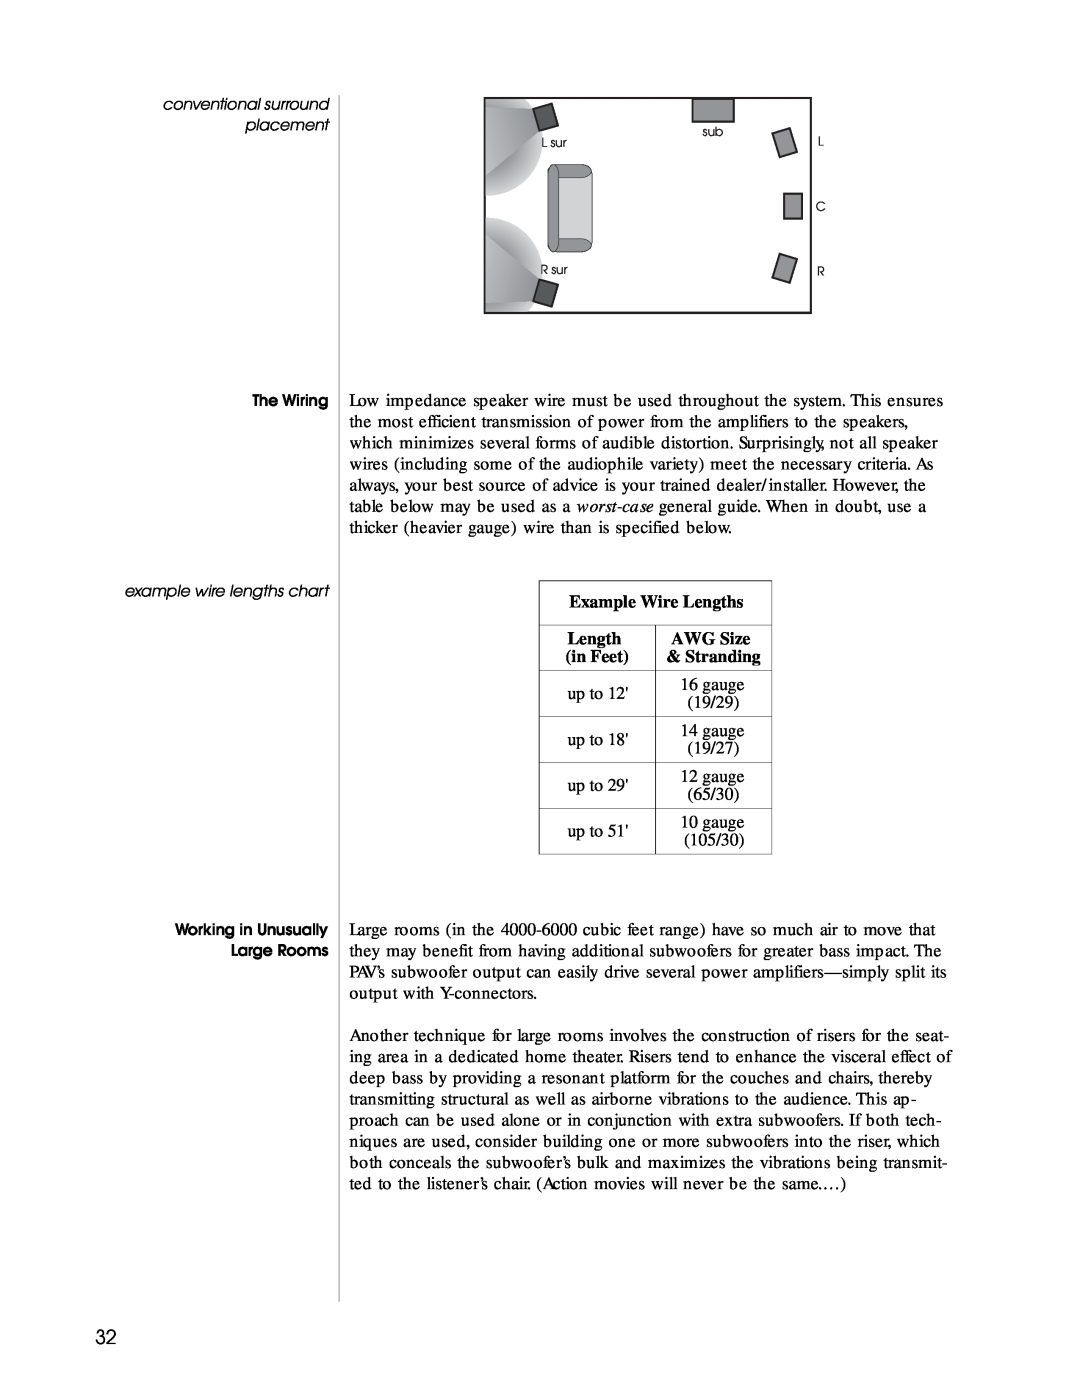 Madrigal Imaging Audio/Video Preamplifier manual Example Wire Lengths, AWG Size, in Feet, Stranding 